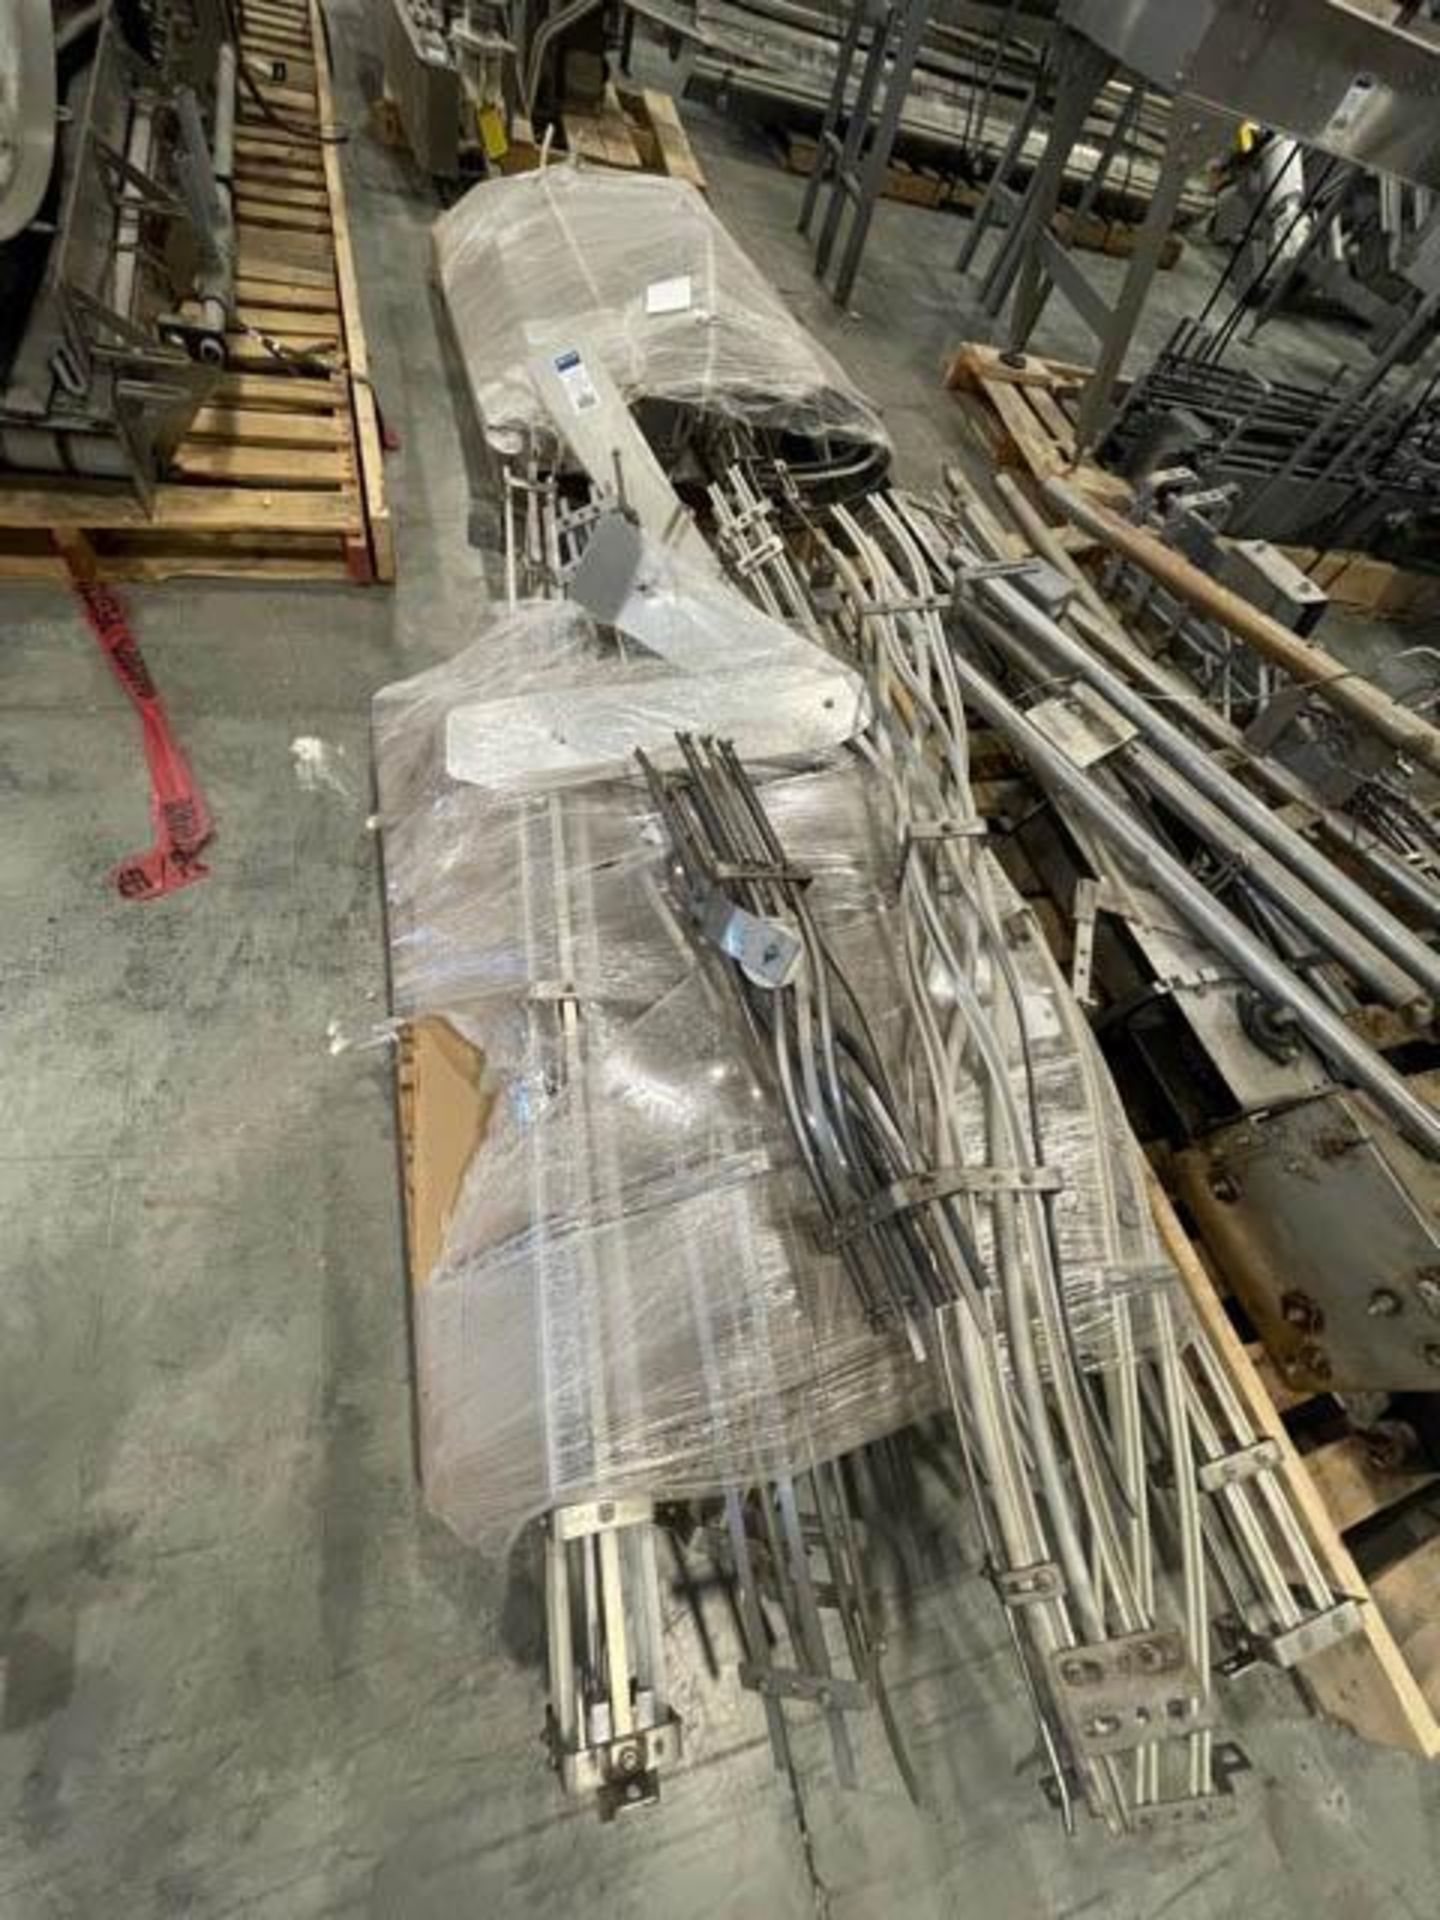 Pallets of Assorted Full Can Conveyor Parts - Located At Pembroke Pines, FL Facility